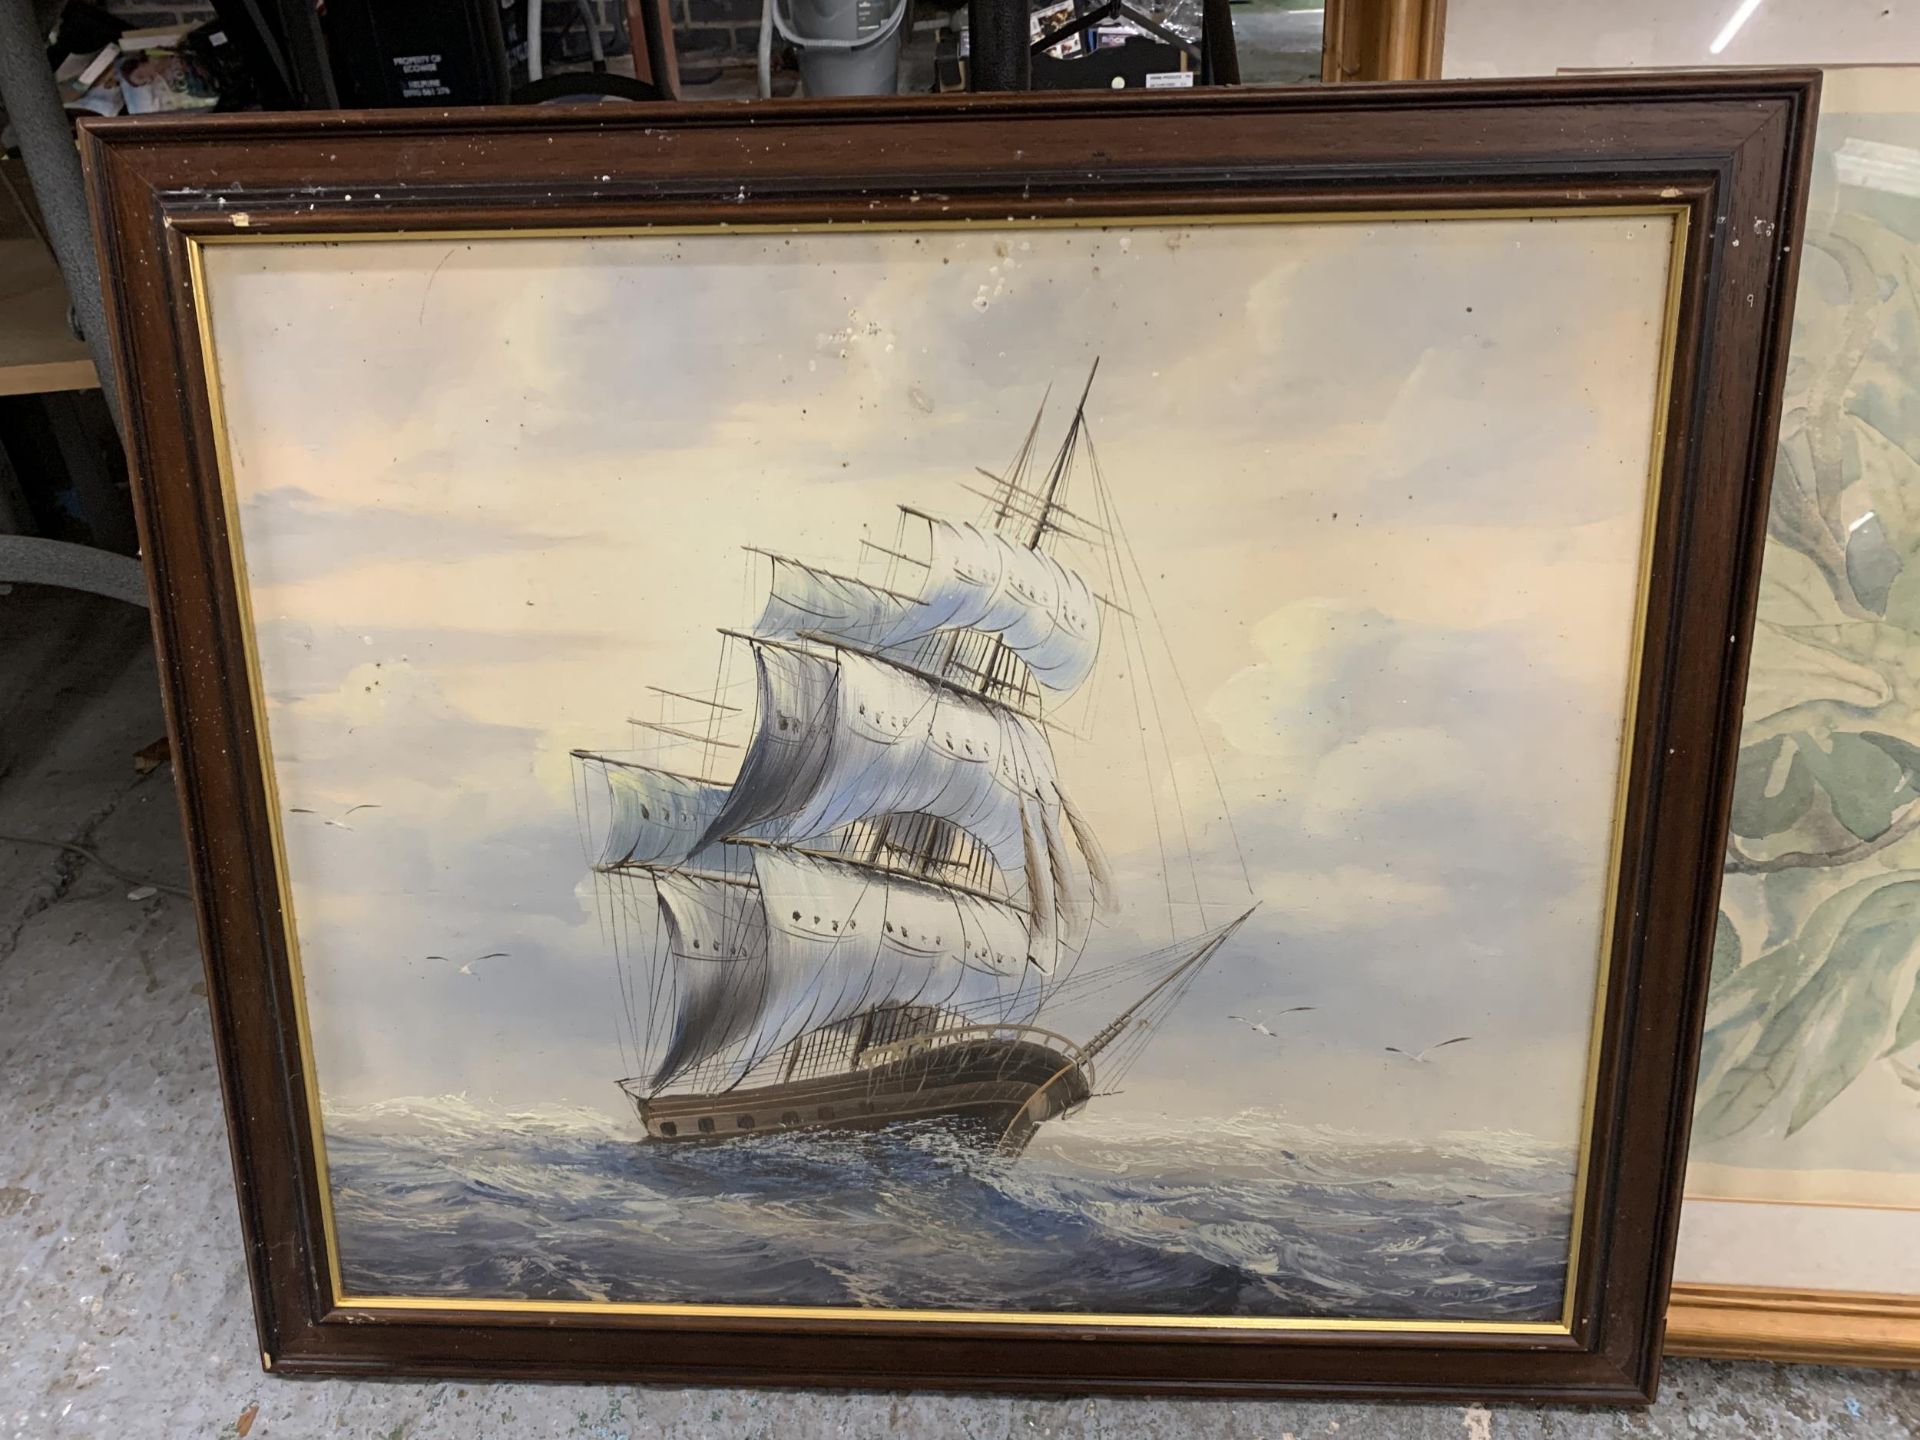 A SIGNED OIL ON CANVAS OF A SAILING SHIP PLUS A FLORAL PRINT - Image 2 of 5